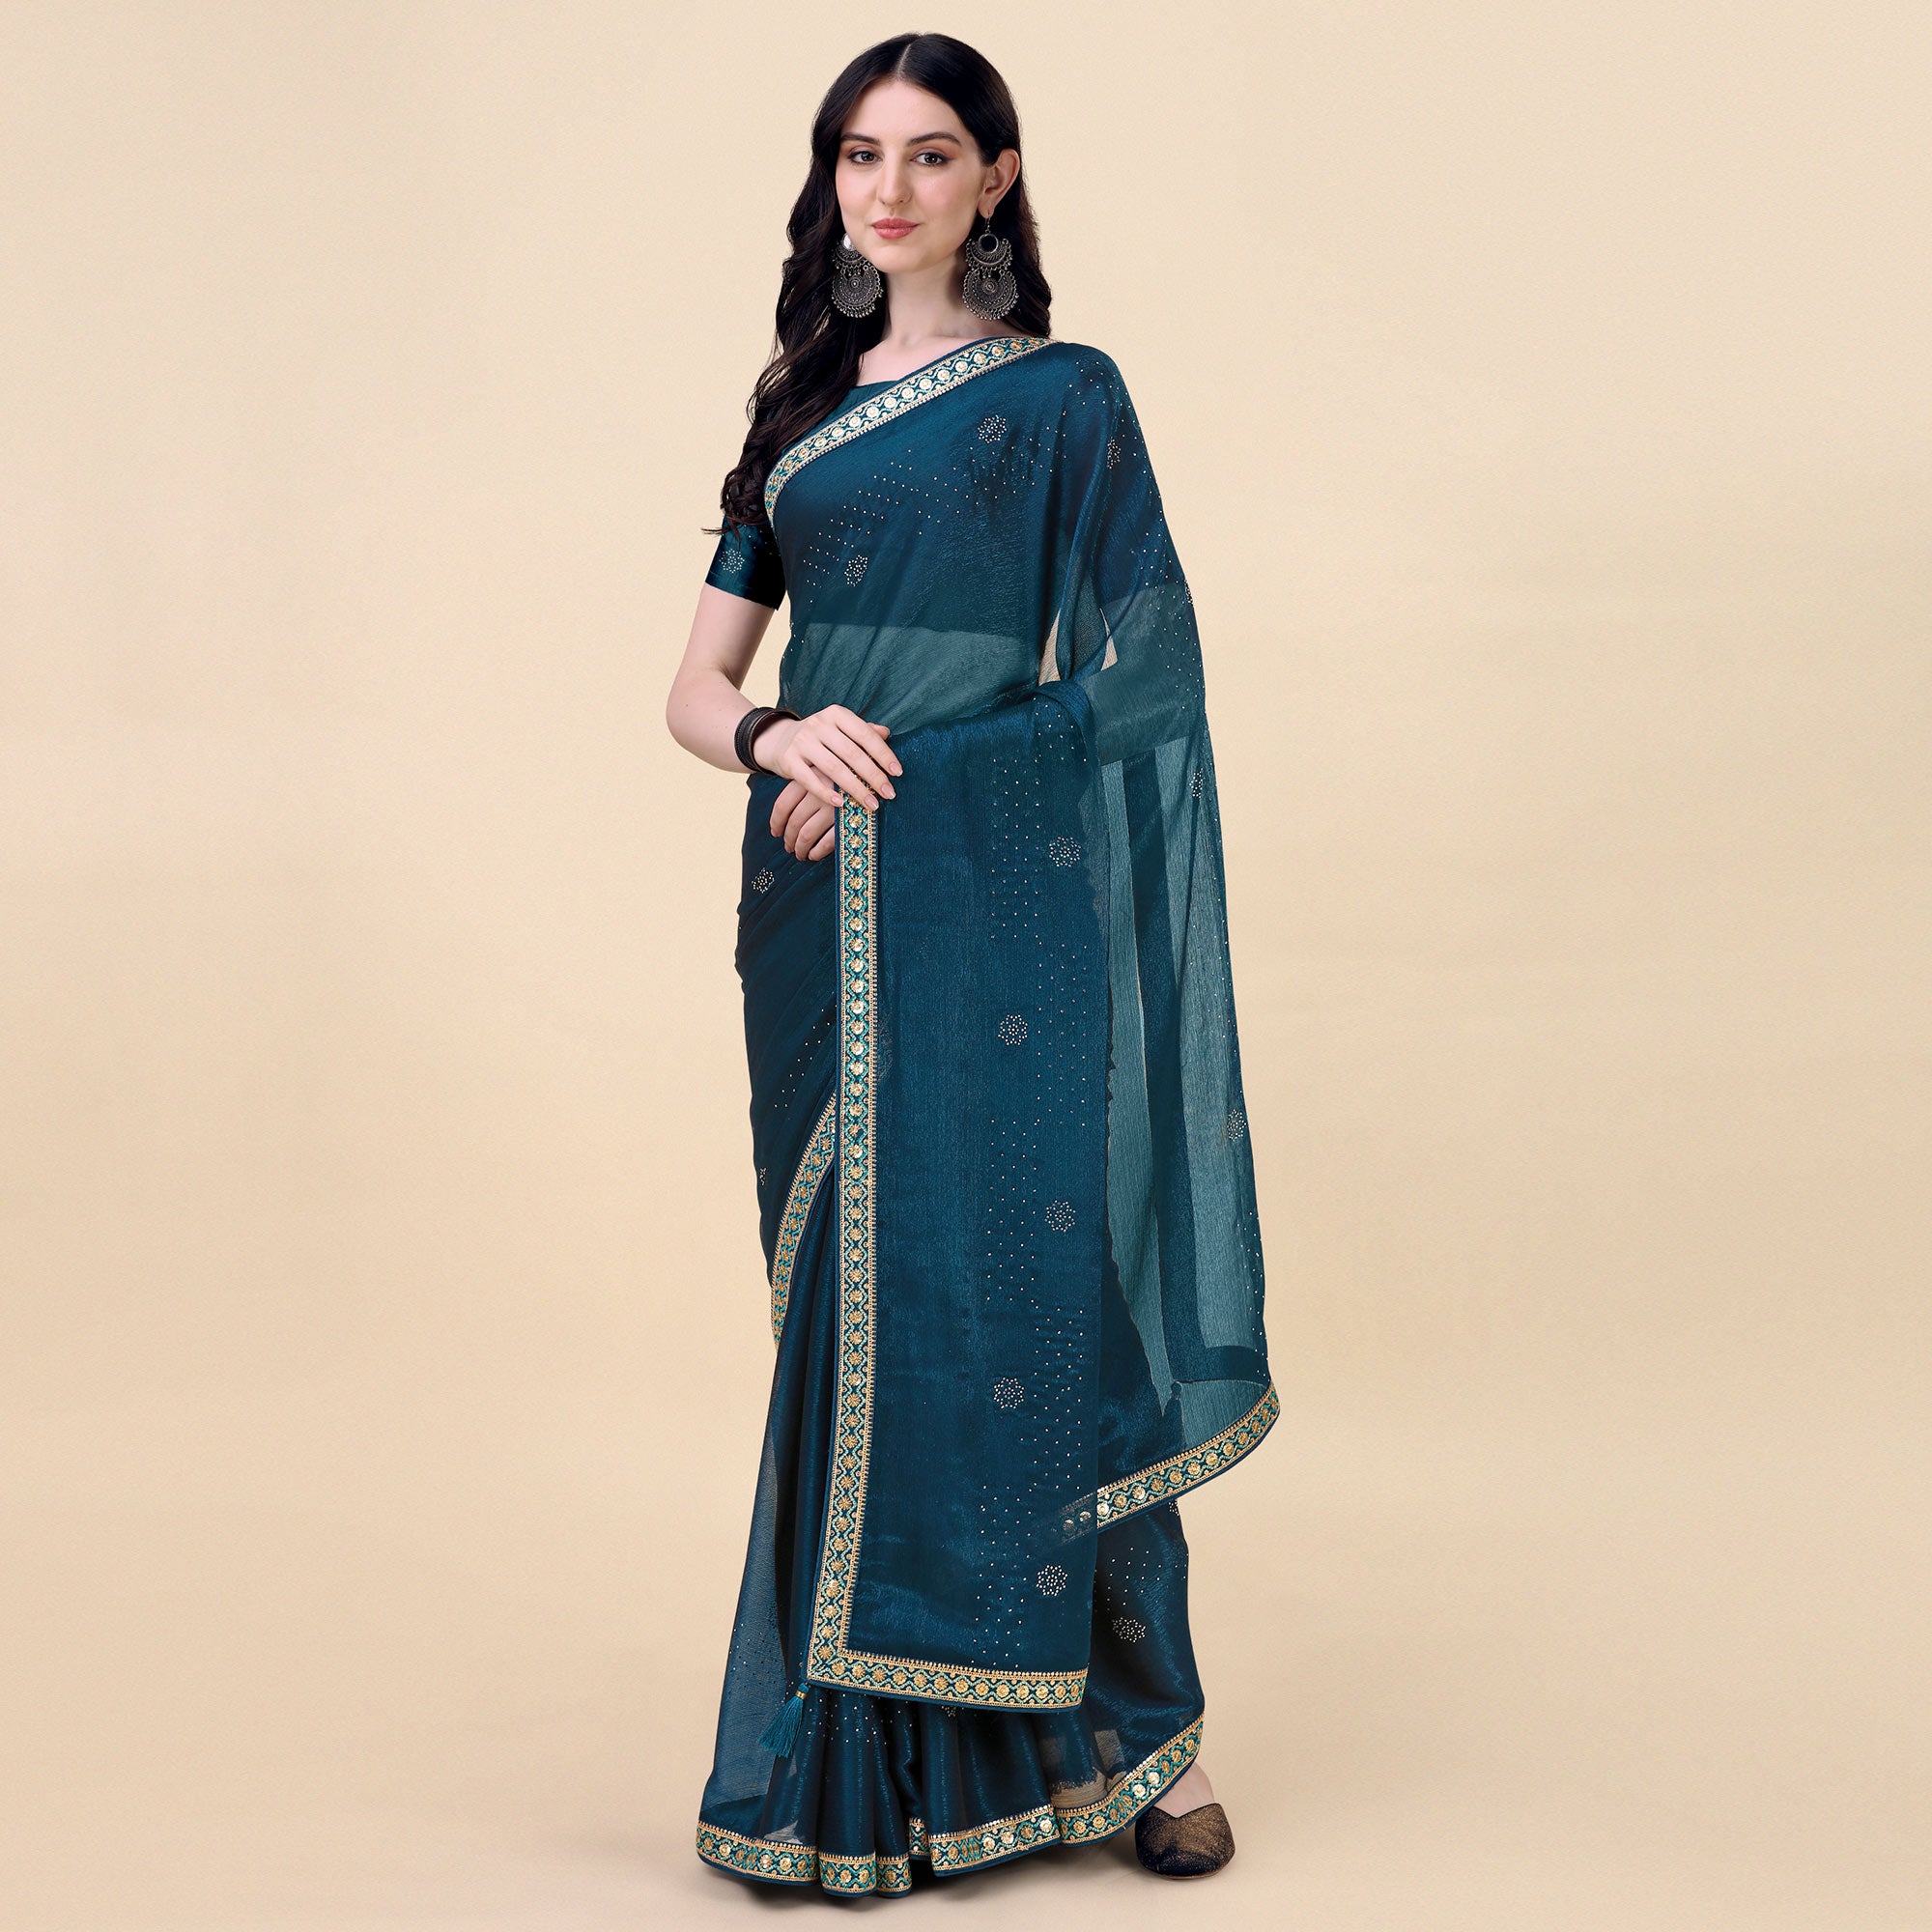 Teal Blue Swarovski With Sequins Embroidered Chiffon Saree